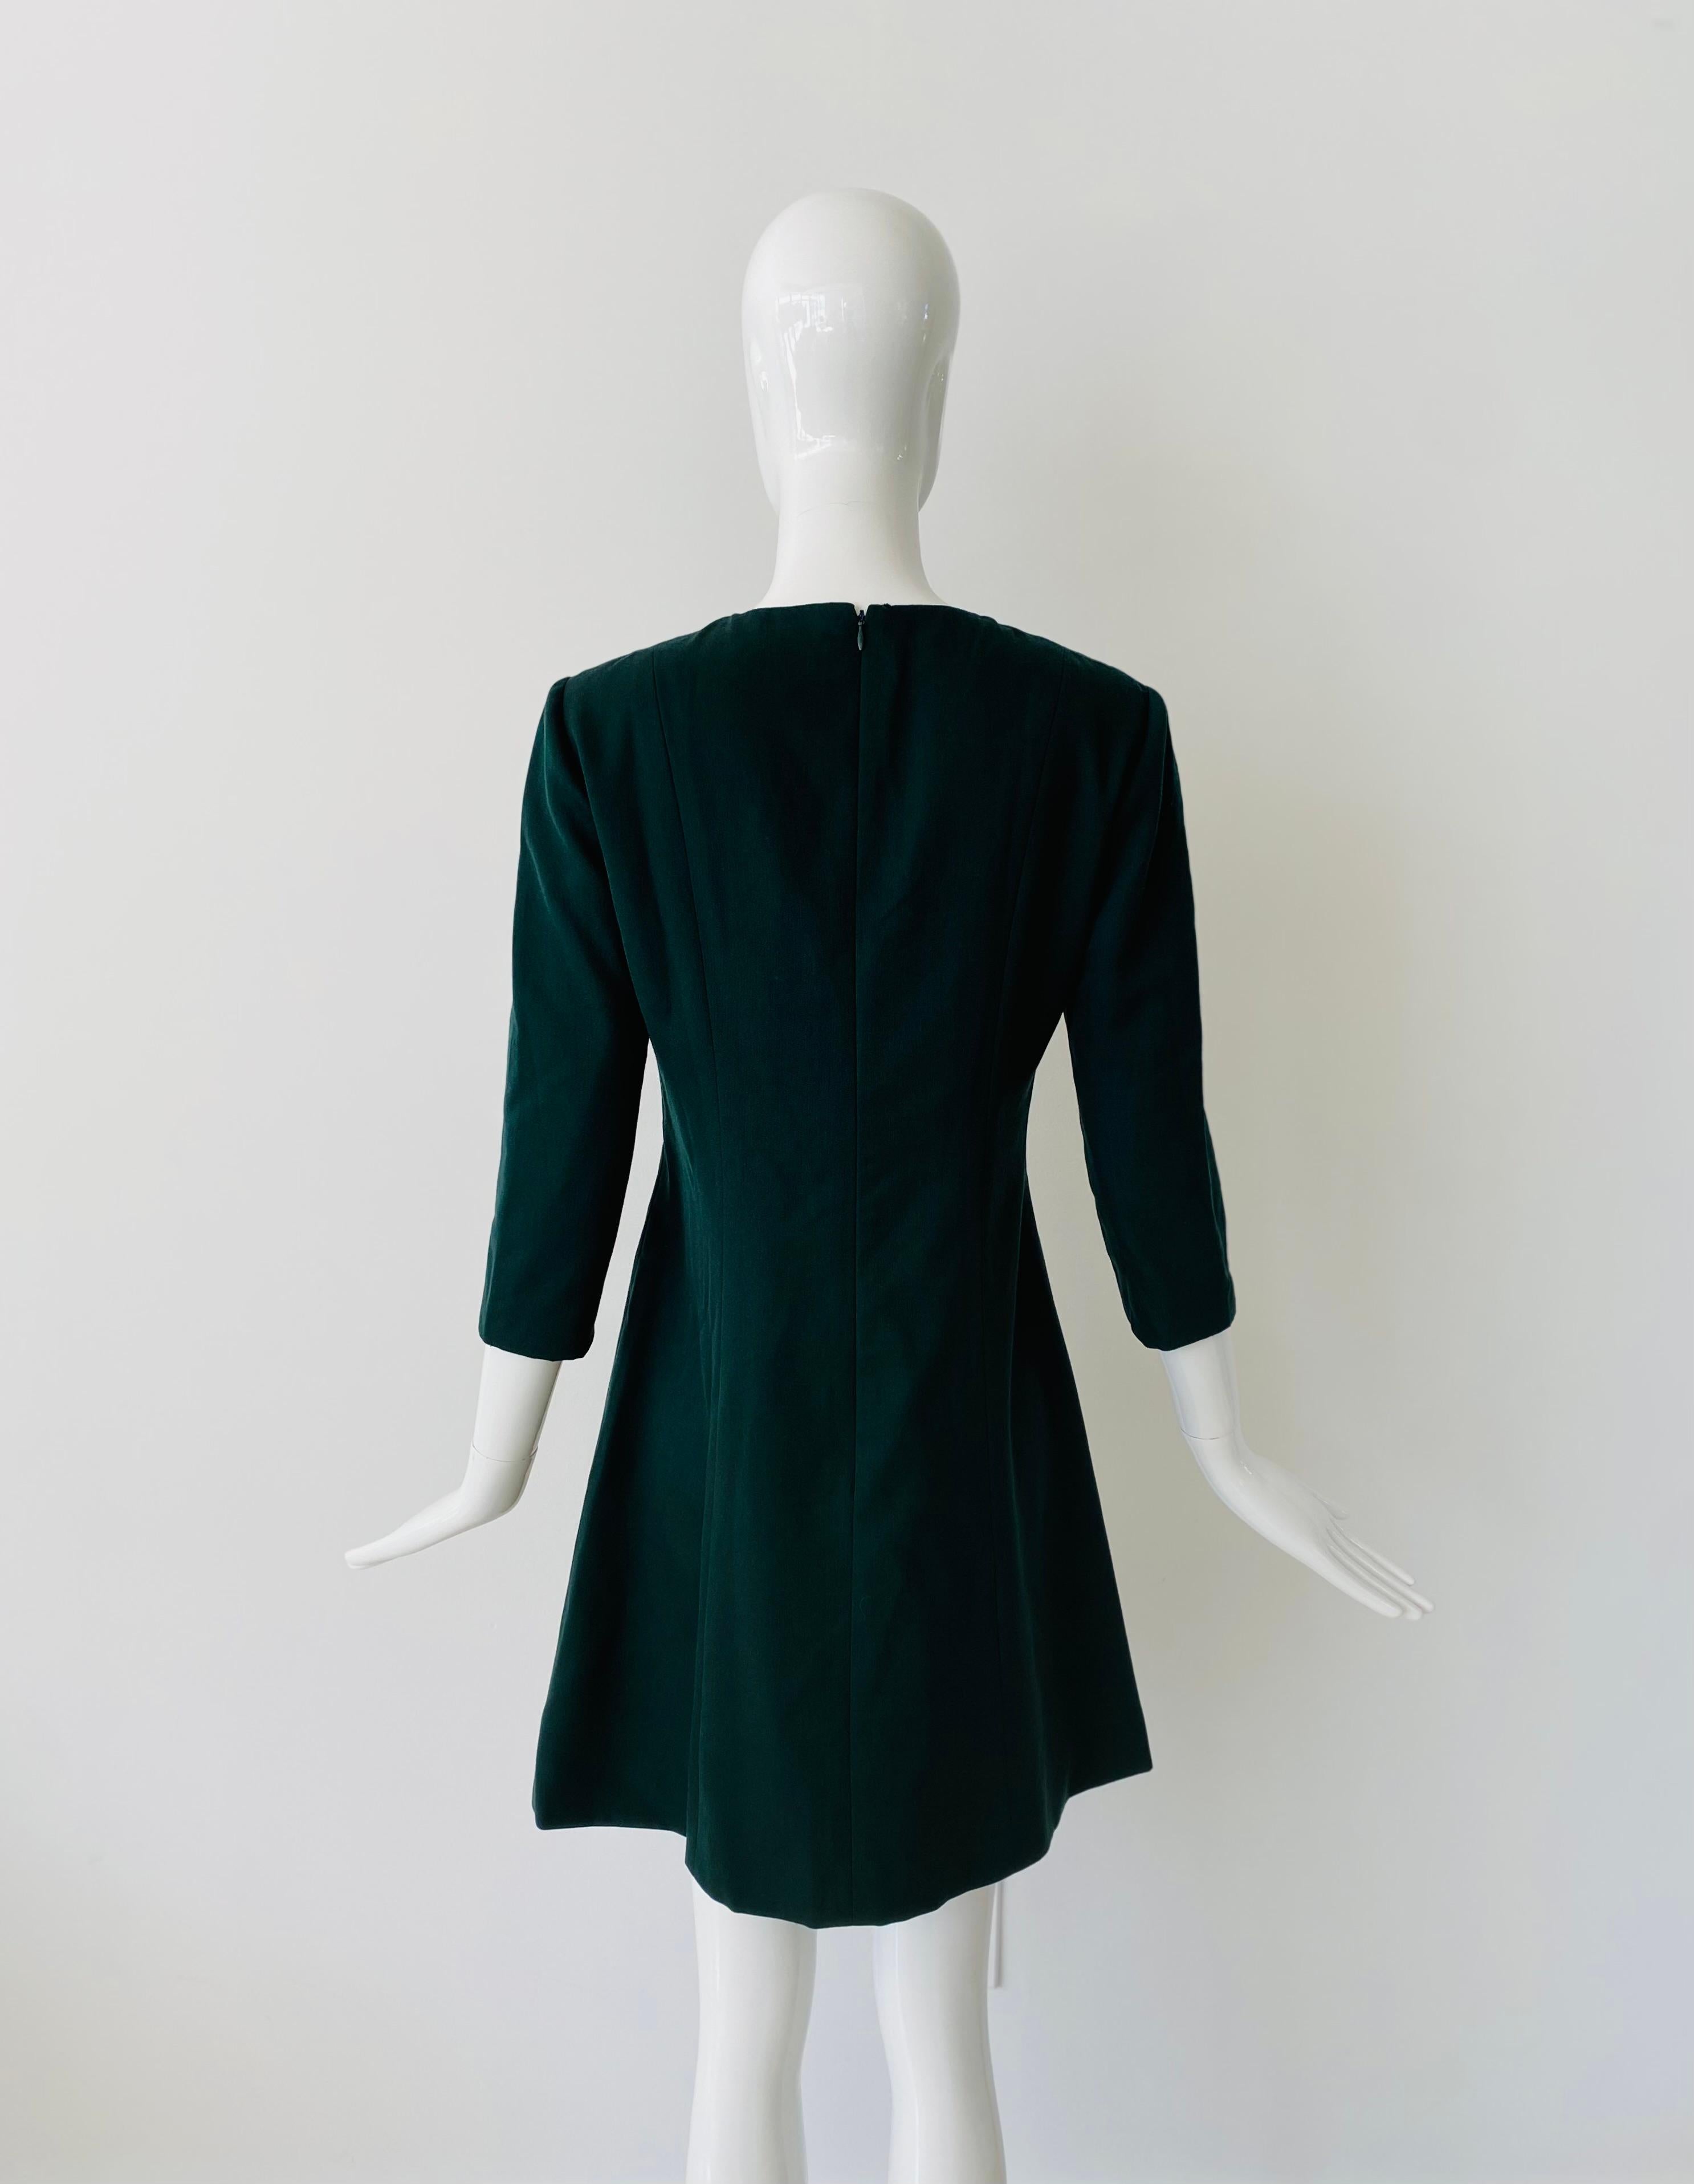 1980s vintage Balenciaga Le Dix wool dress and car coat. The fabric is a beautiful forest green light wool with silk lining. The dress has 3/4 sleeves, a high round neckline, a slightly fitted waist silhouette and flared skirt that falls right above